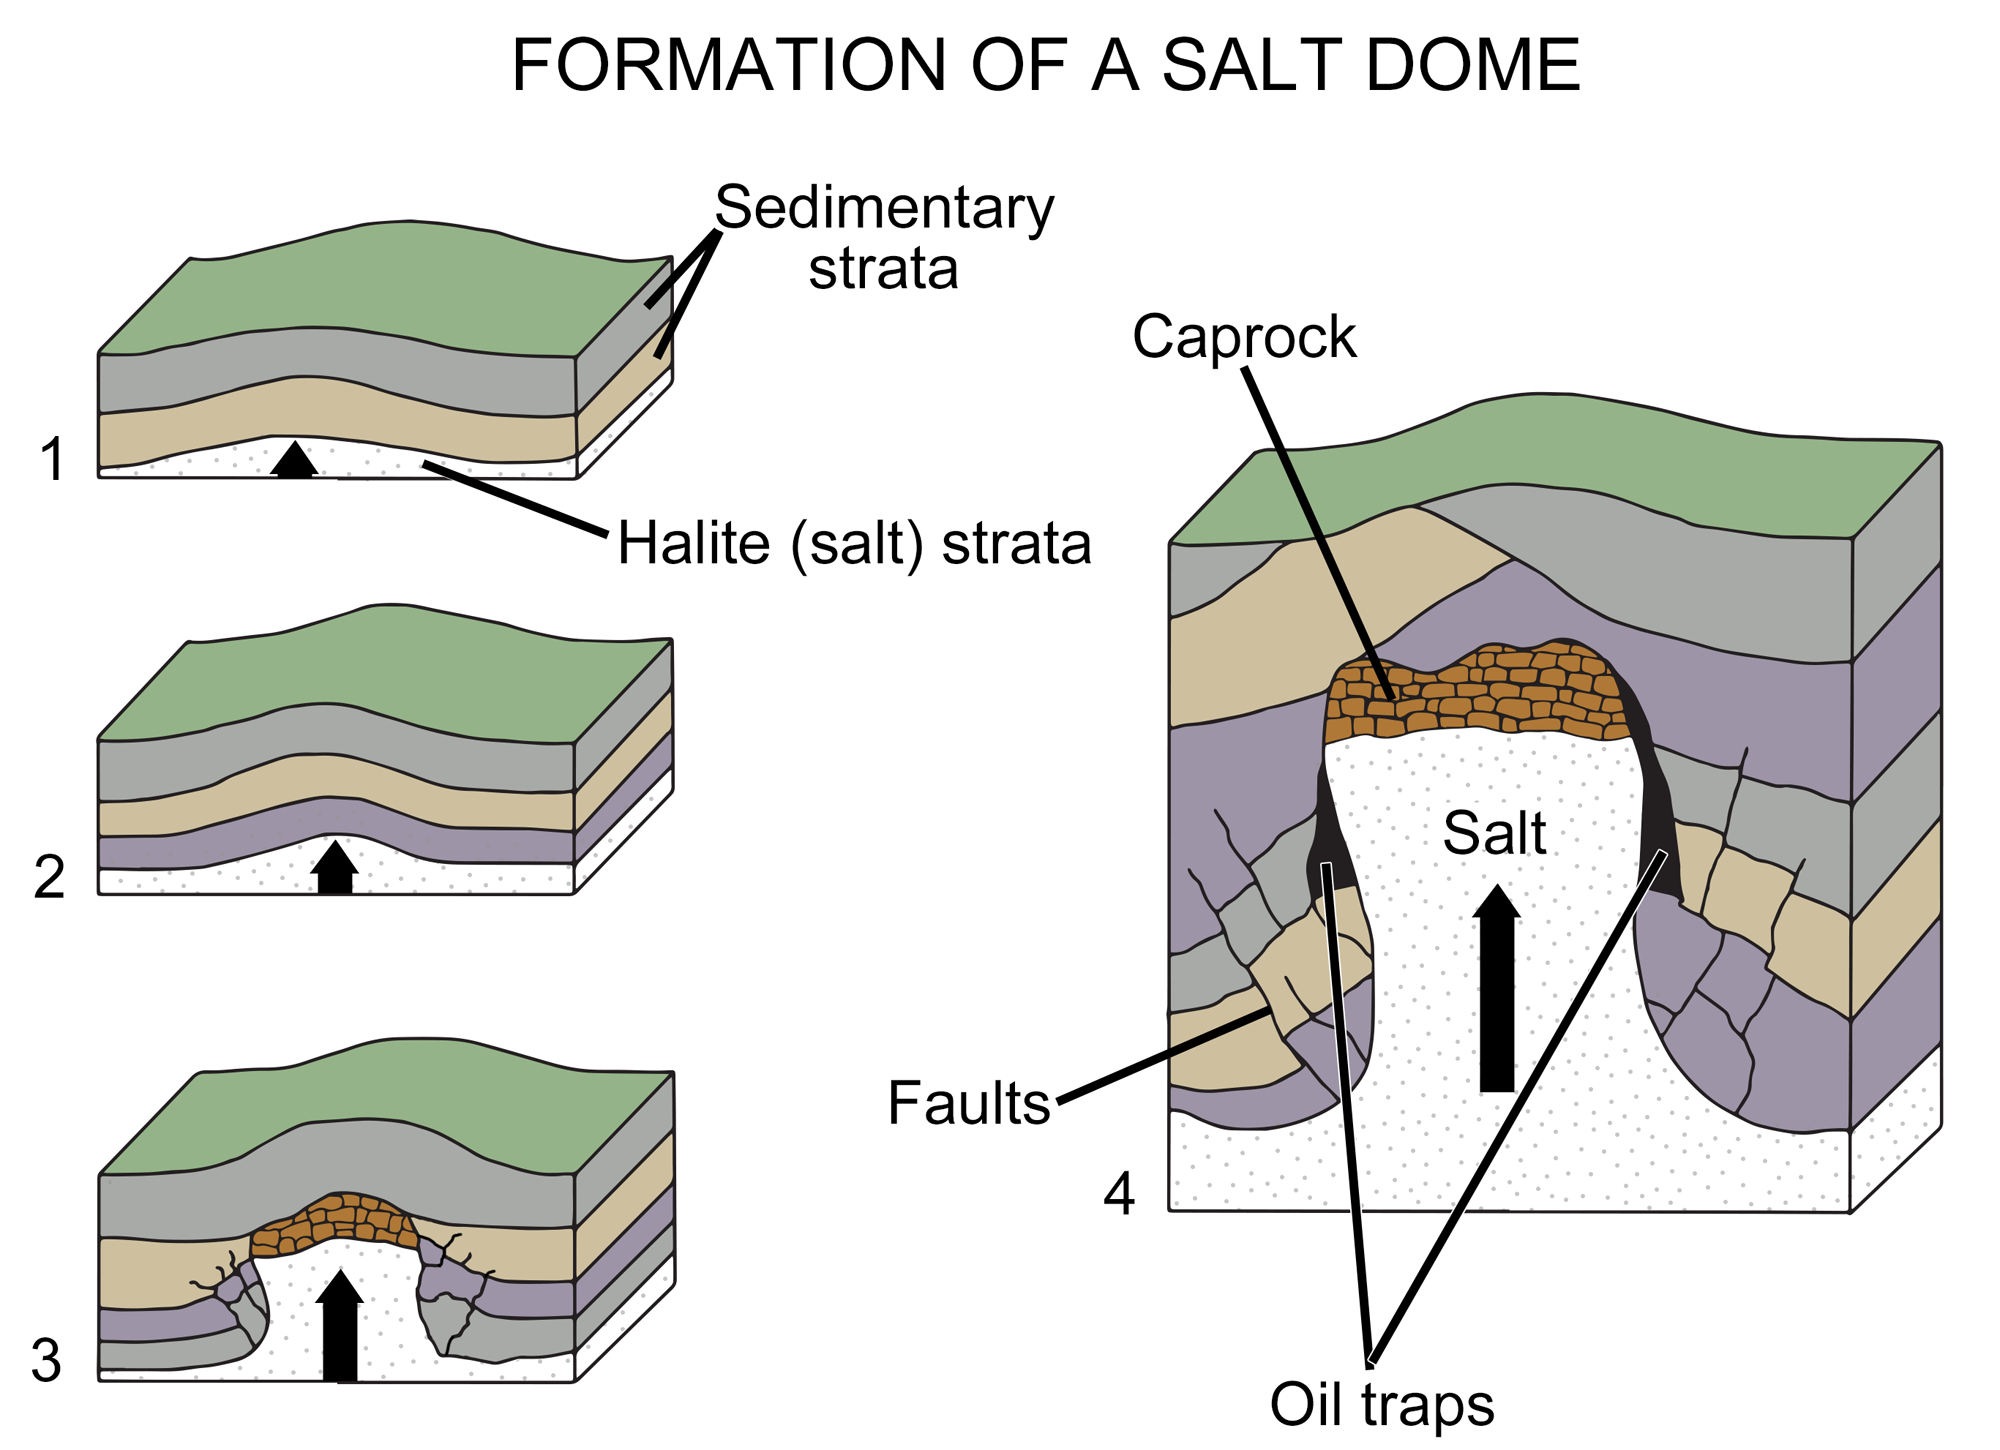 Diagram showing the stages in the formation of a salt dome and associated oil traps.